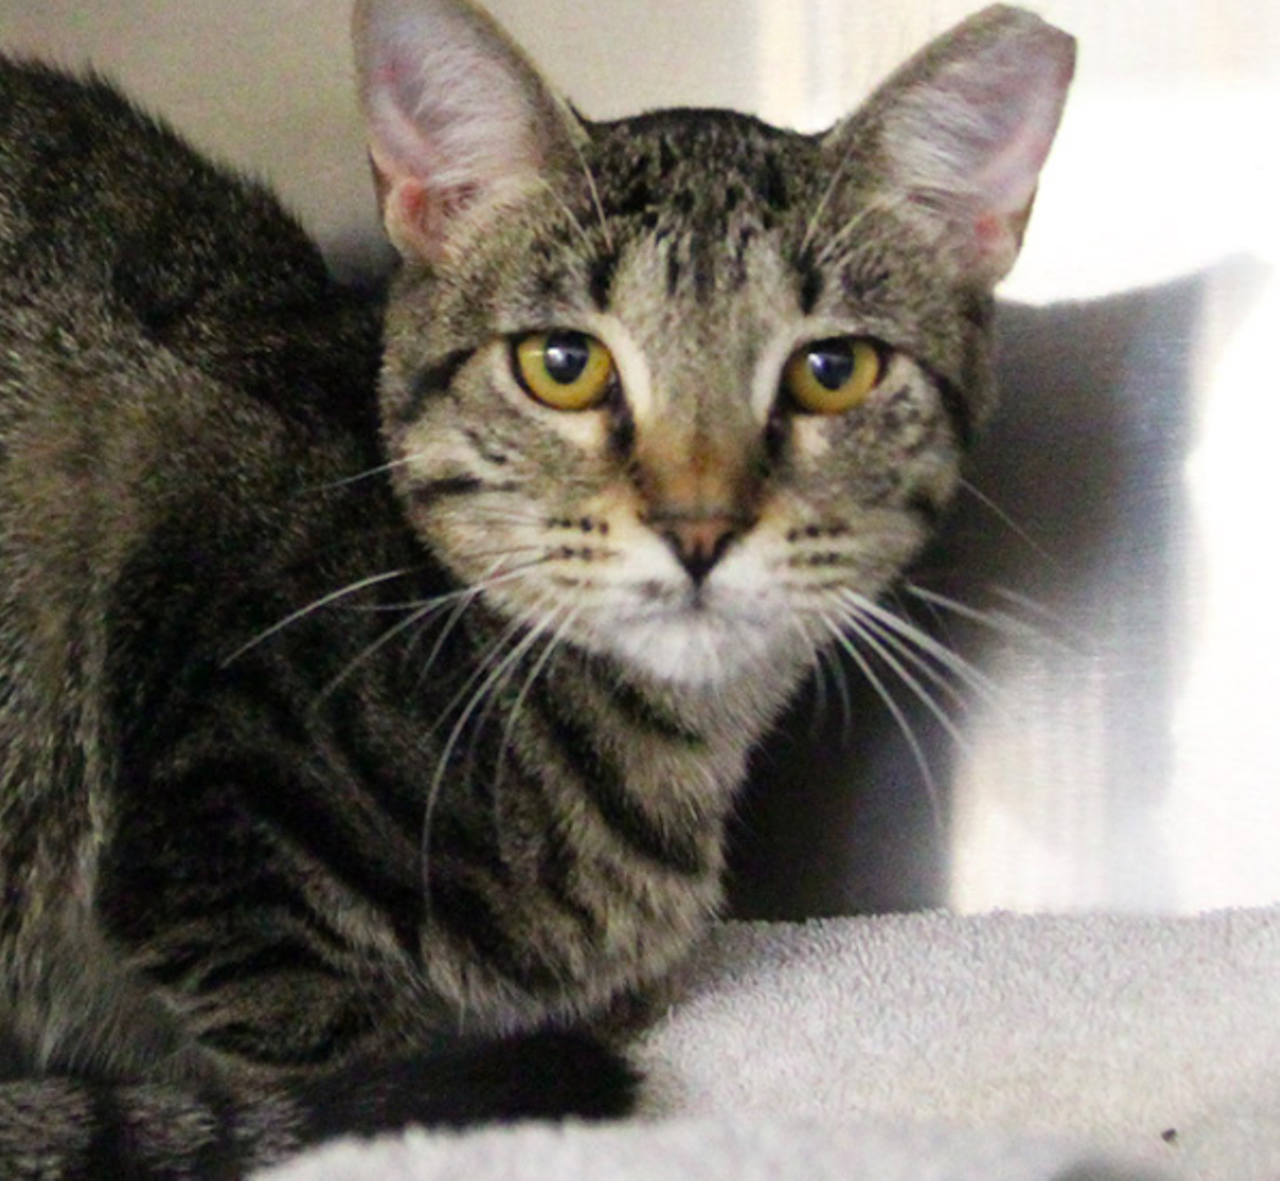 Pudge
"Hi, I’m Pudge! I’m a sweet tabby kitty but a bit bashful right now. It must be because I’d much rather be in a loving and calm home with a nice friend who’ll be gentle with me. I’m really looking forward to finding that home soon where I can finally relax."